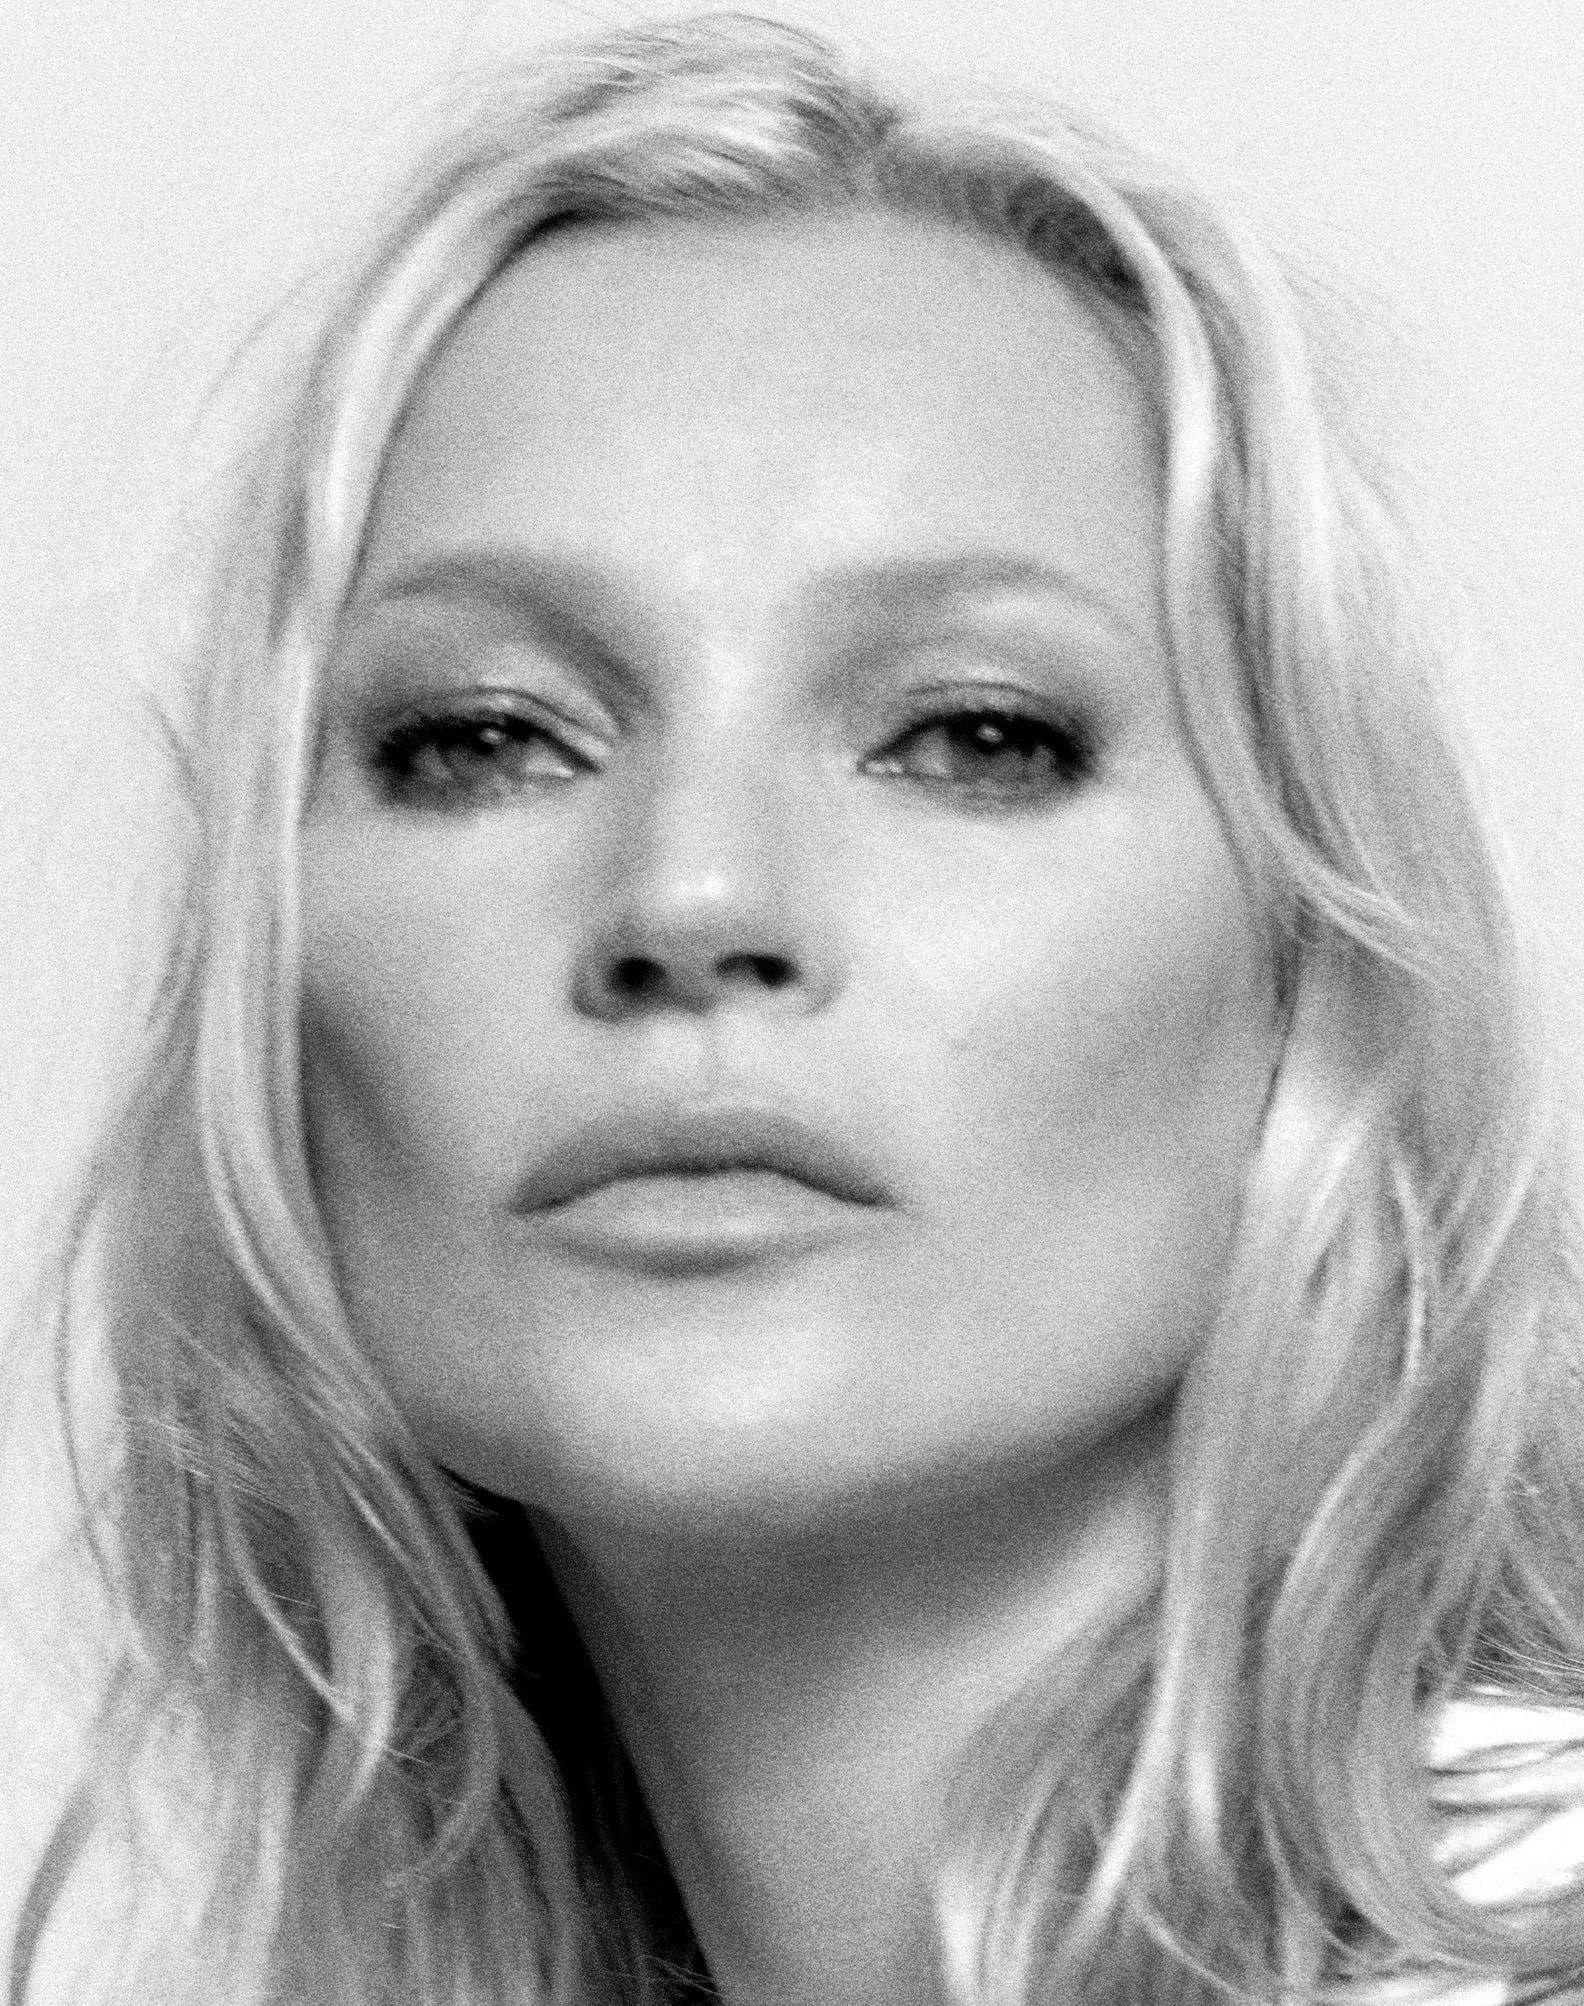 From rock'n'roll to fashion royalty: Anine Bing on working with Kate Moss  and celebrating the brand's 10th anniversary - Vogue Scandinavia